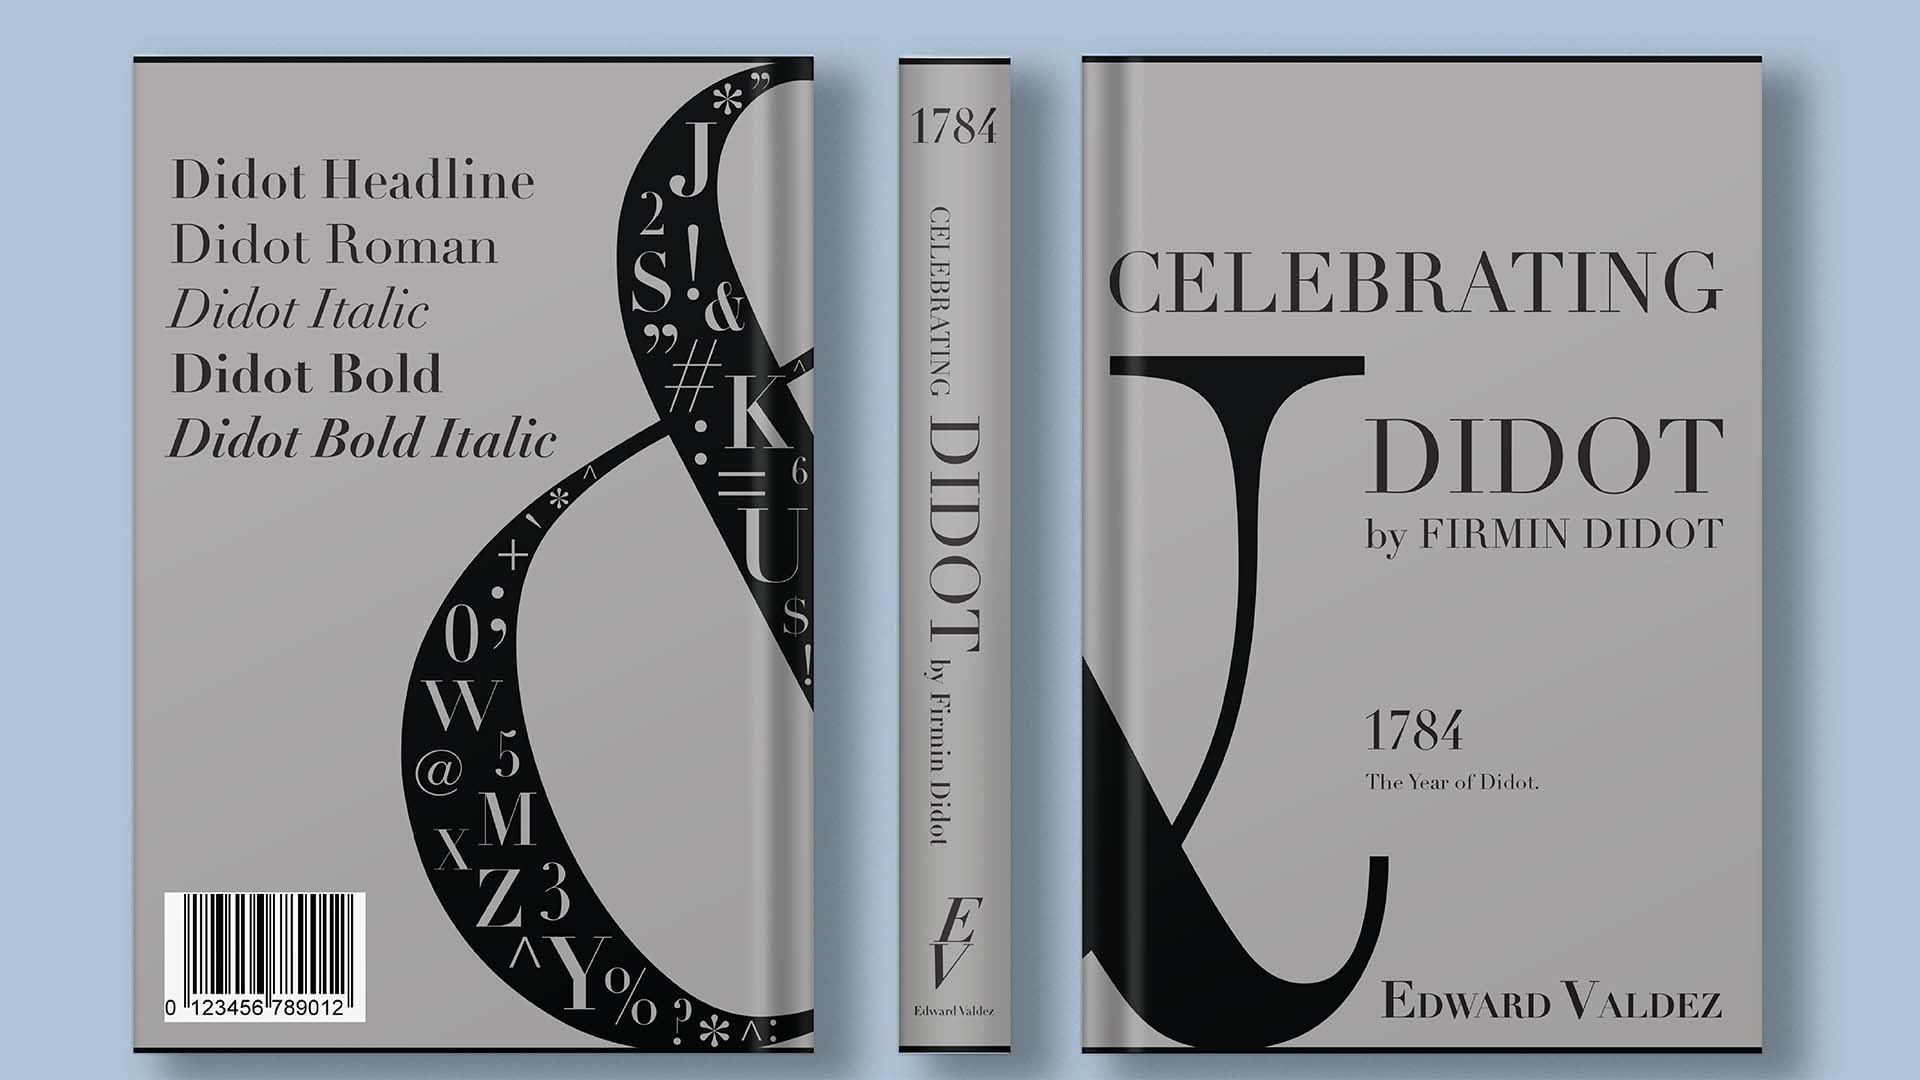  / “Book Jacket,” Print, 22 inches X 9 inches book jacket, 2020. A book jacket dedicated to the typeface: Didot, and it’s creator Firmin Didot. 